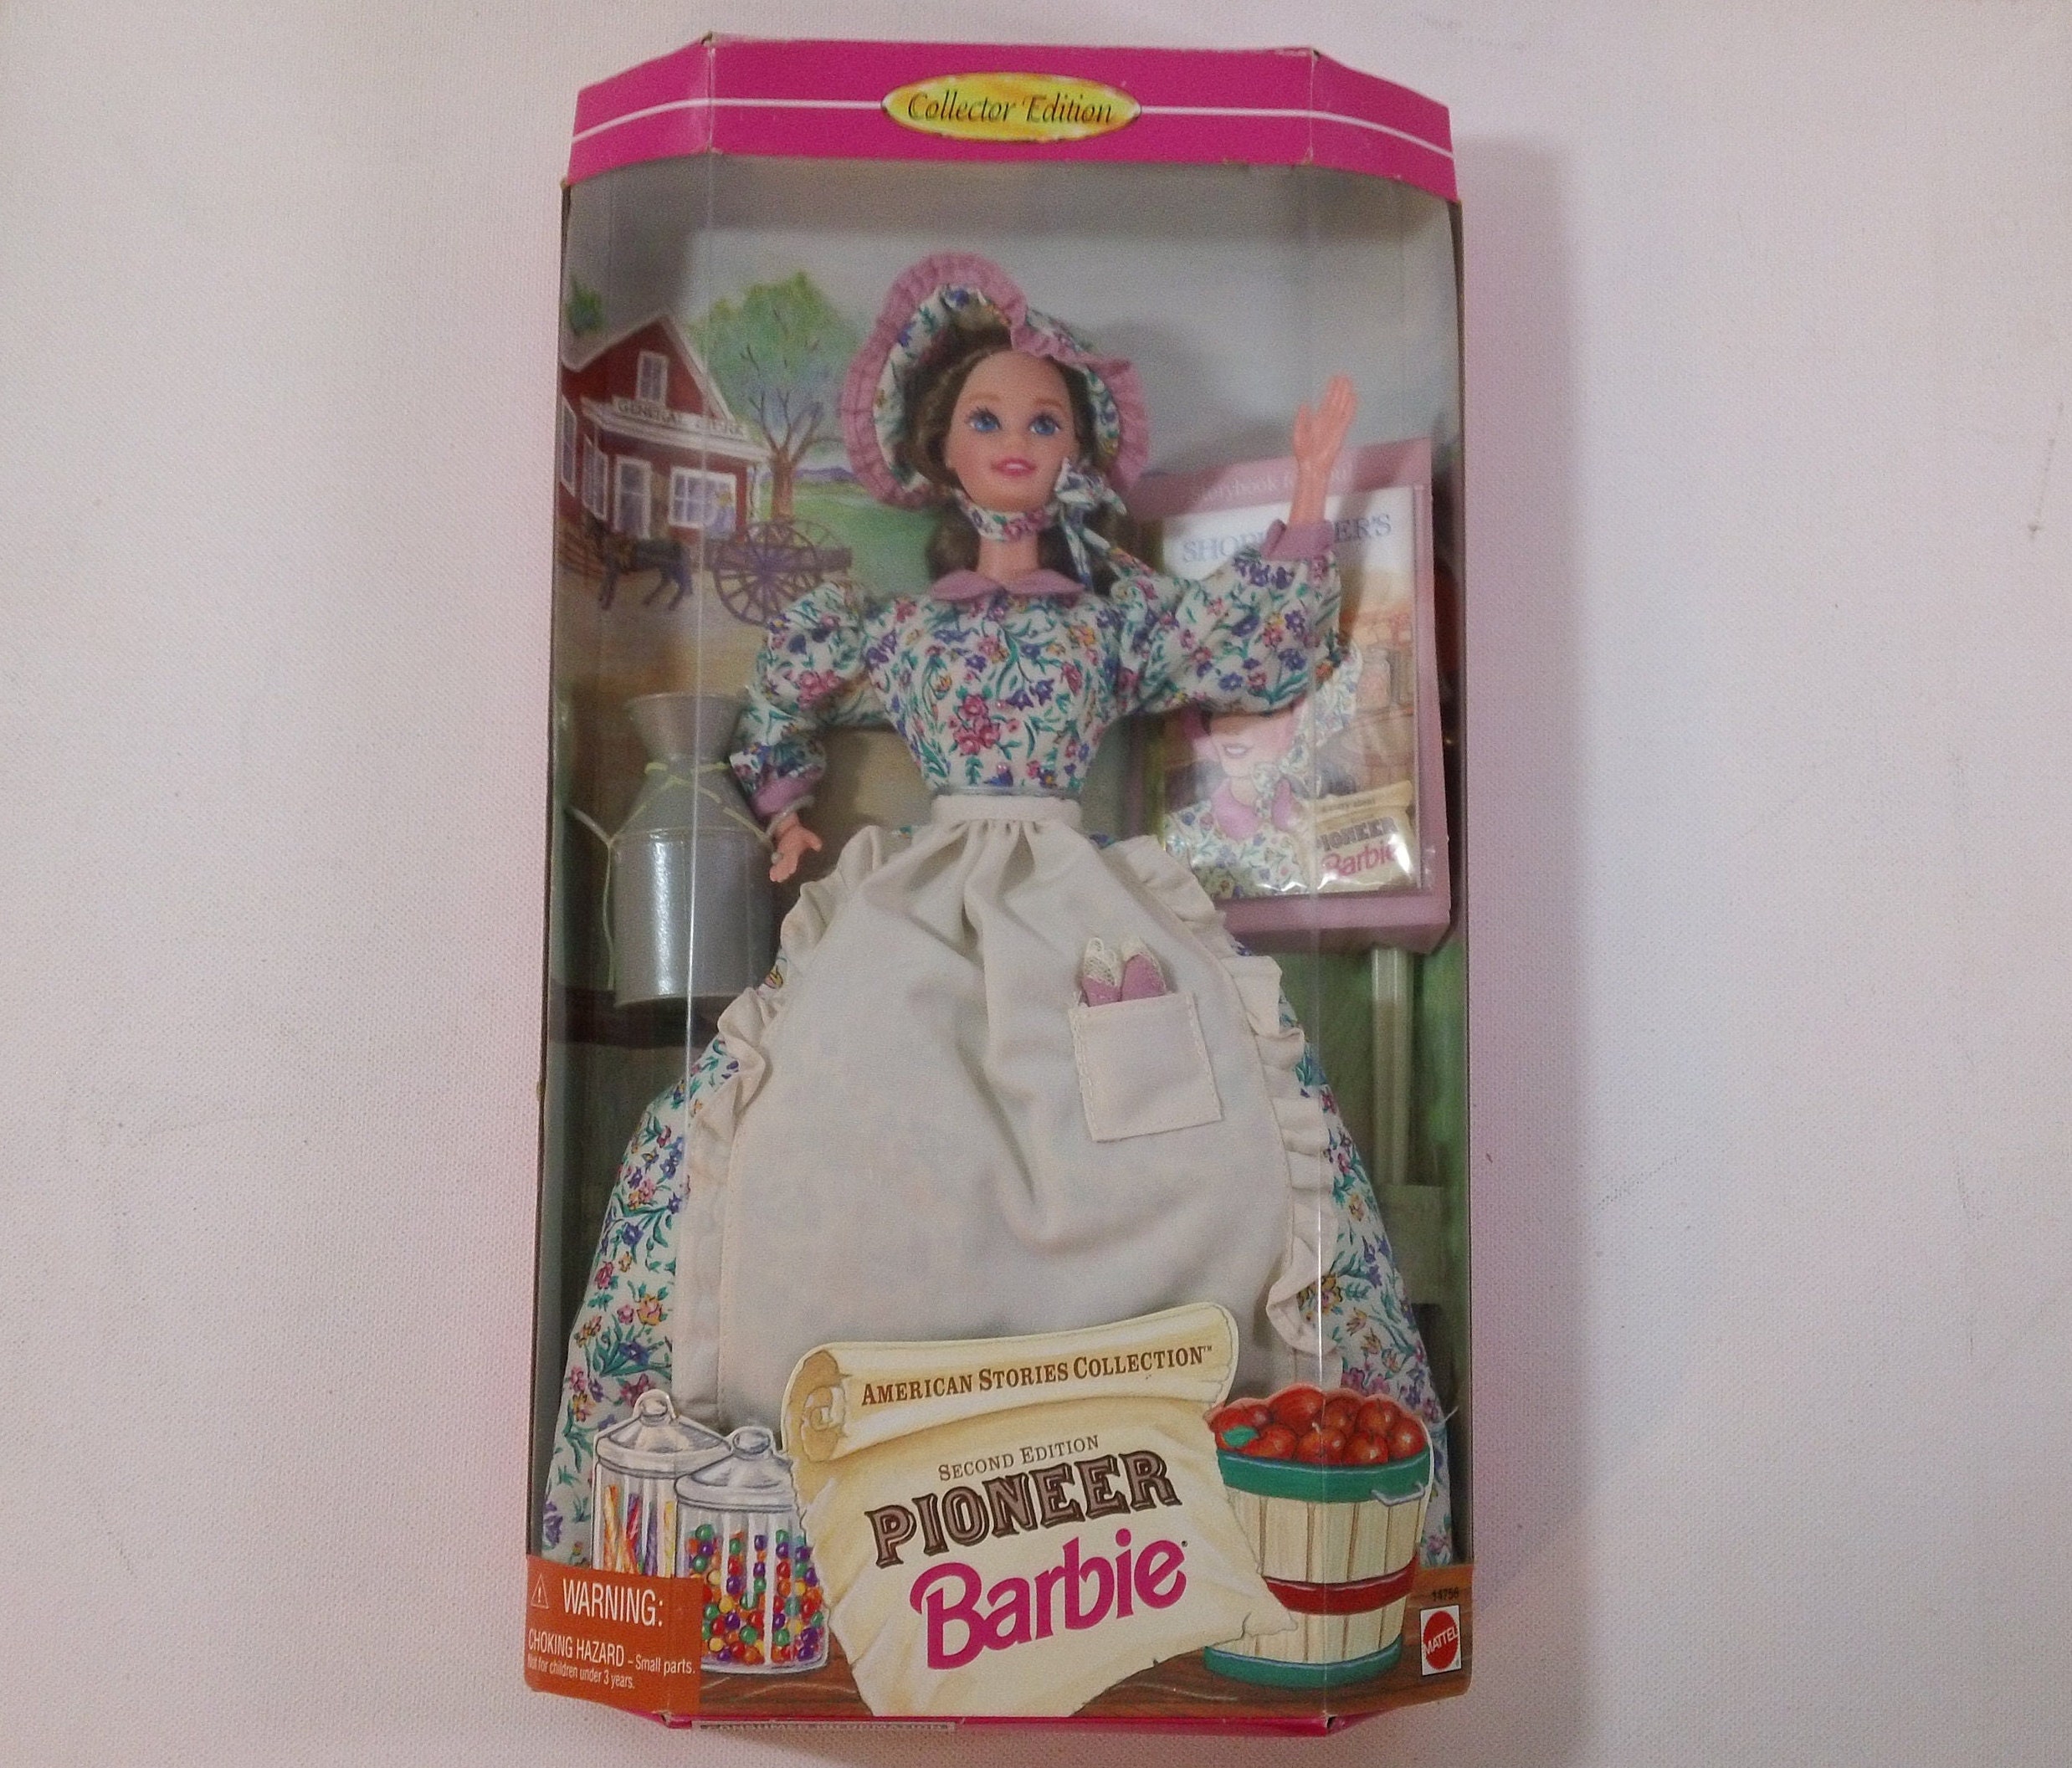 Mattel Barbie Pioneer American Stories Collection 2nd Edition 1995 for sale online